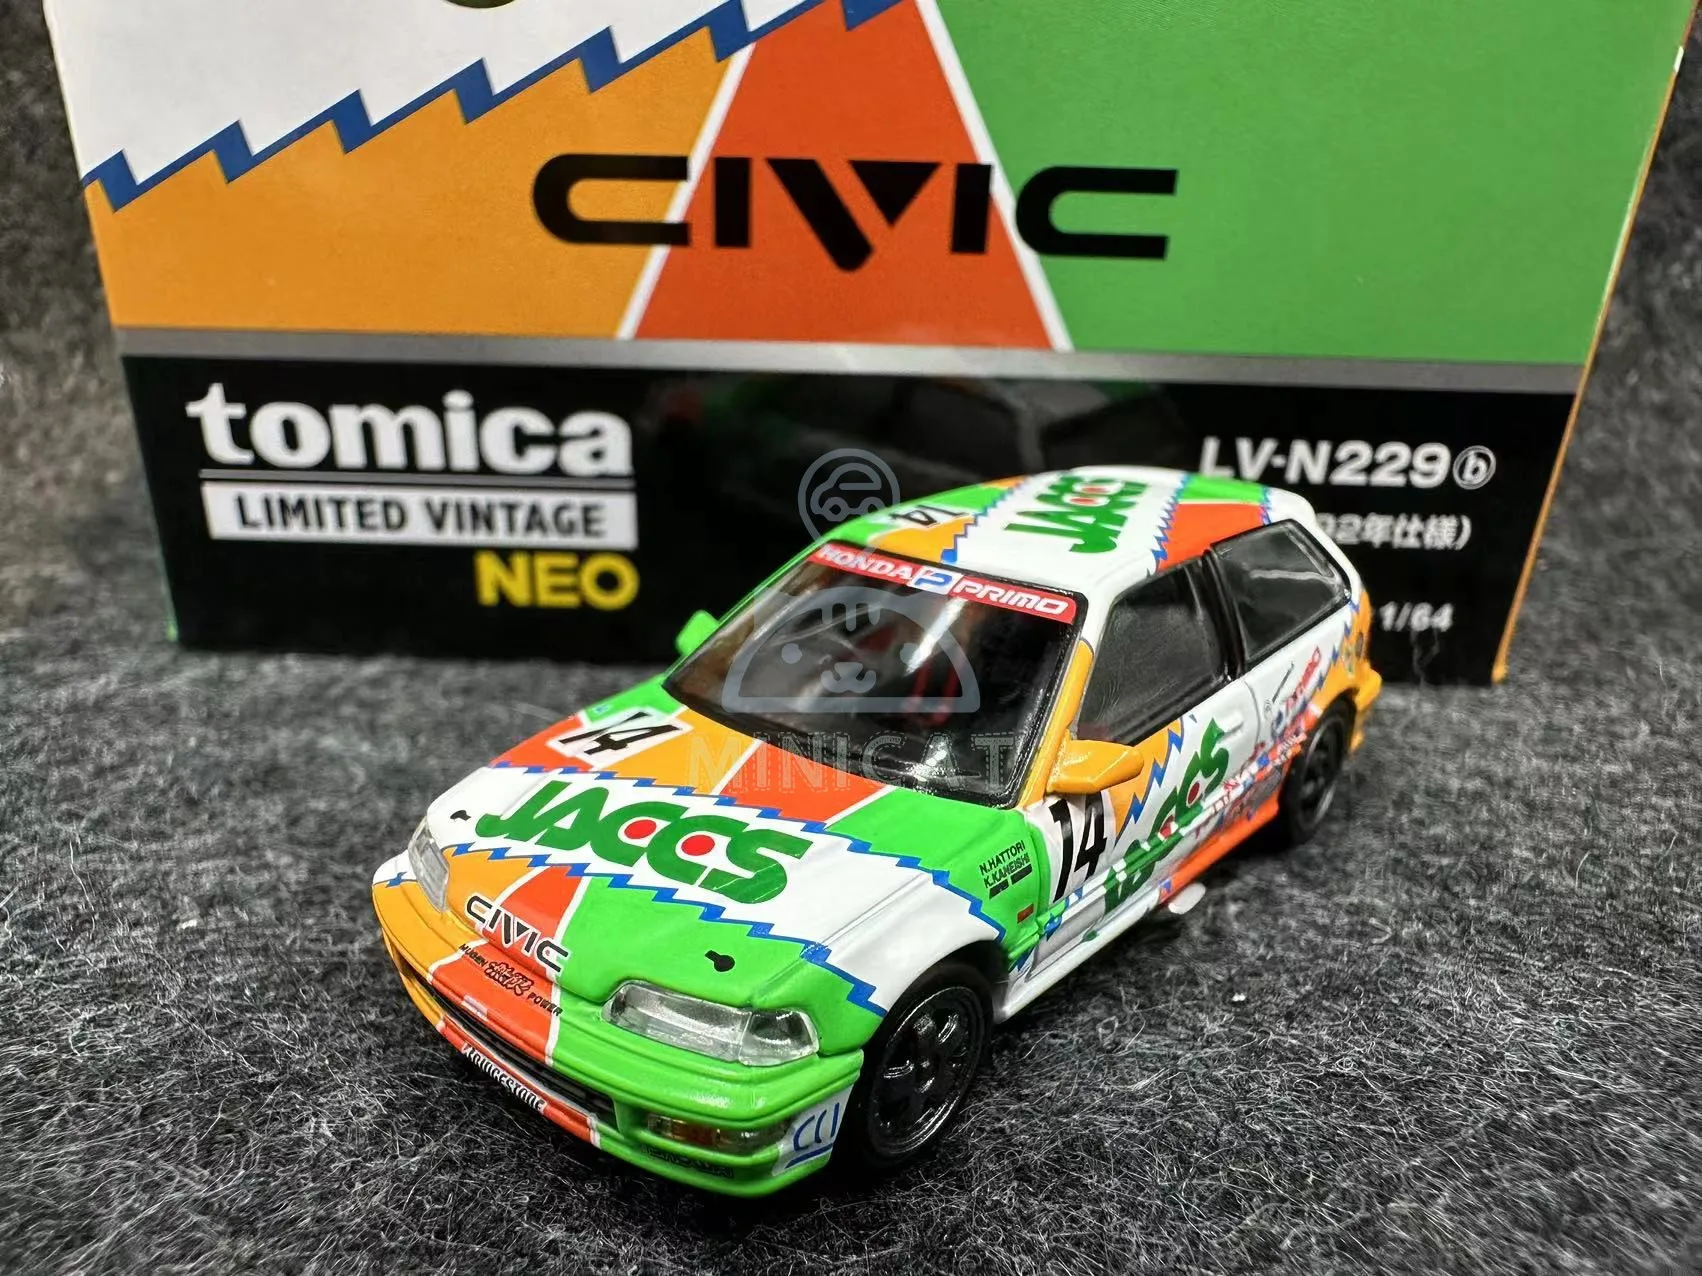 

24.2 Tomytec Tomica 1:64 TLV N229B Civic EF Group A 1992 Limited Edition Simulation Alloy Static Car Model Toy Gift